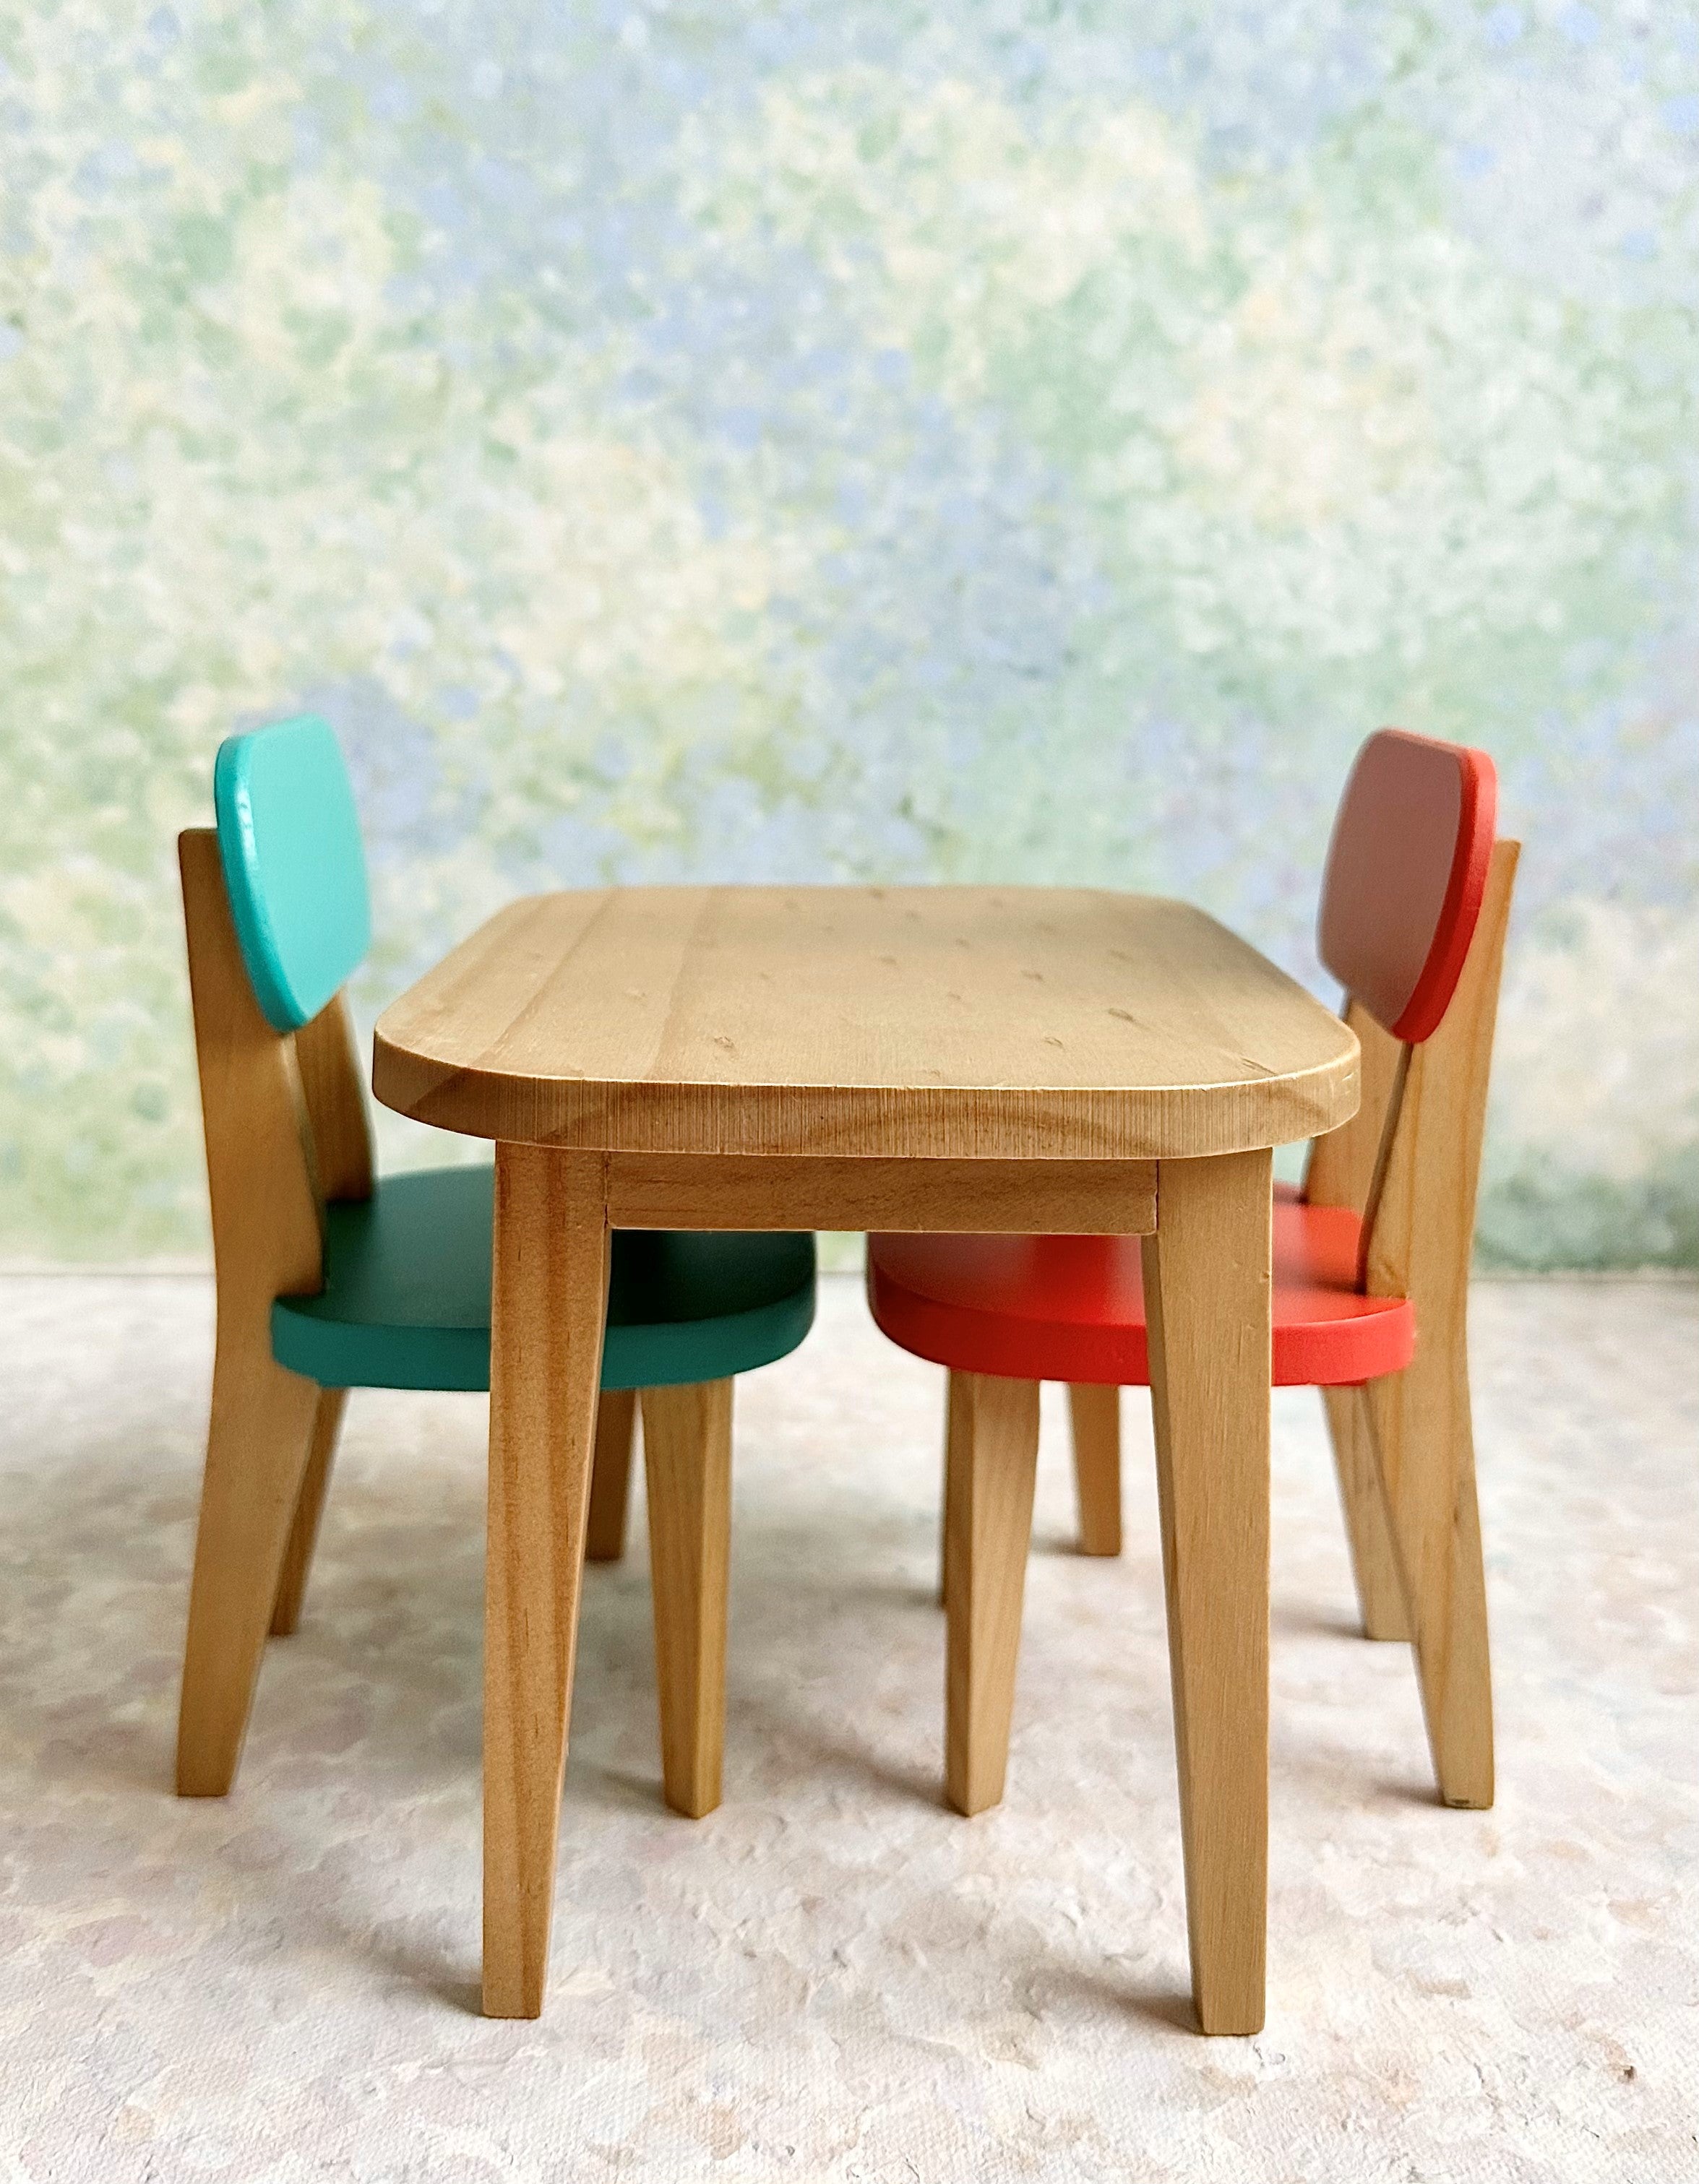 Wooden Table & Chairs - 2014